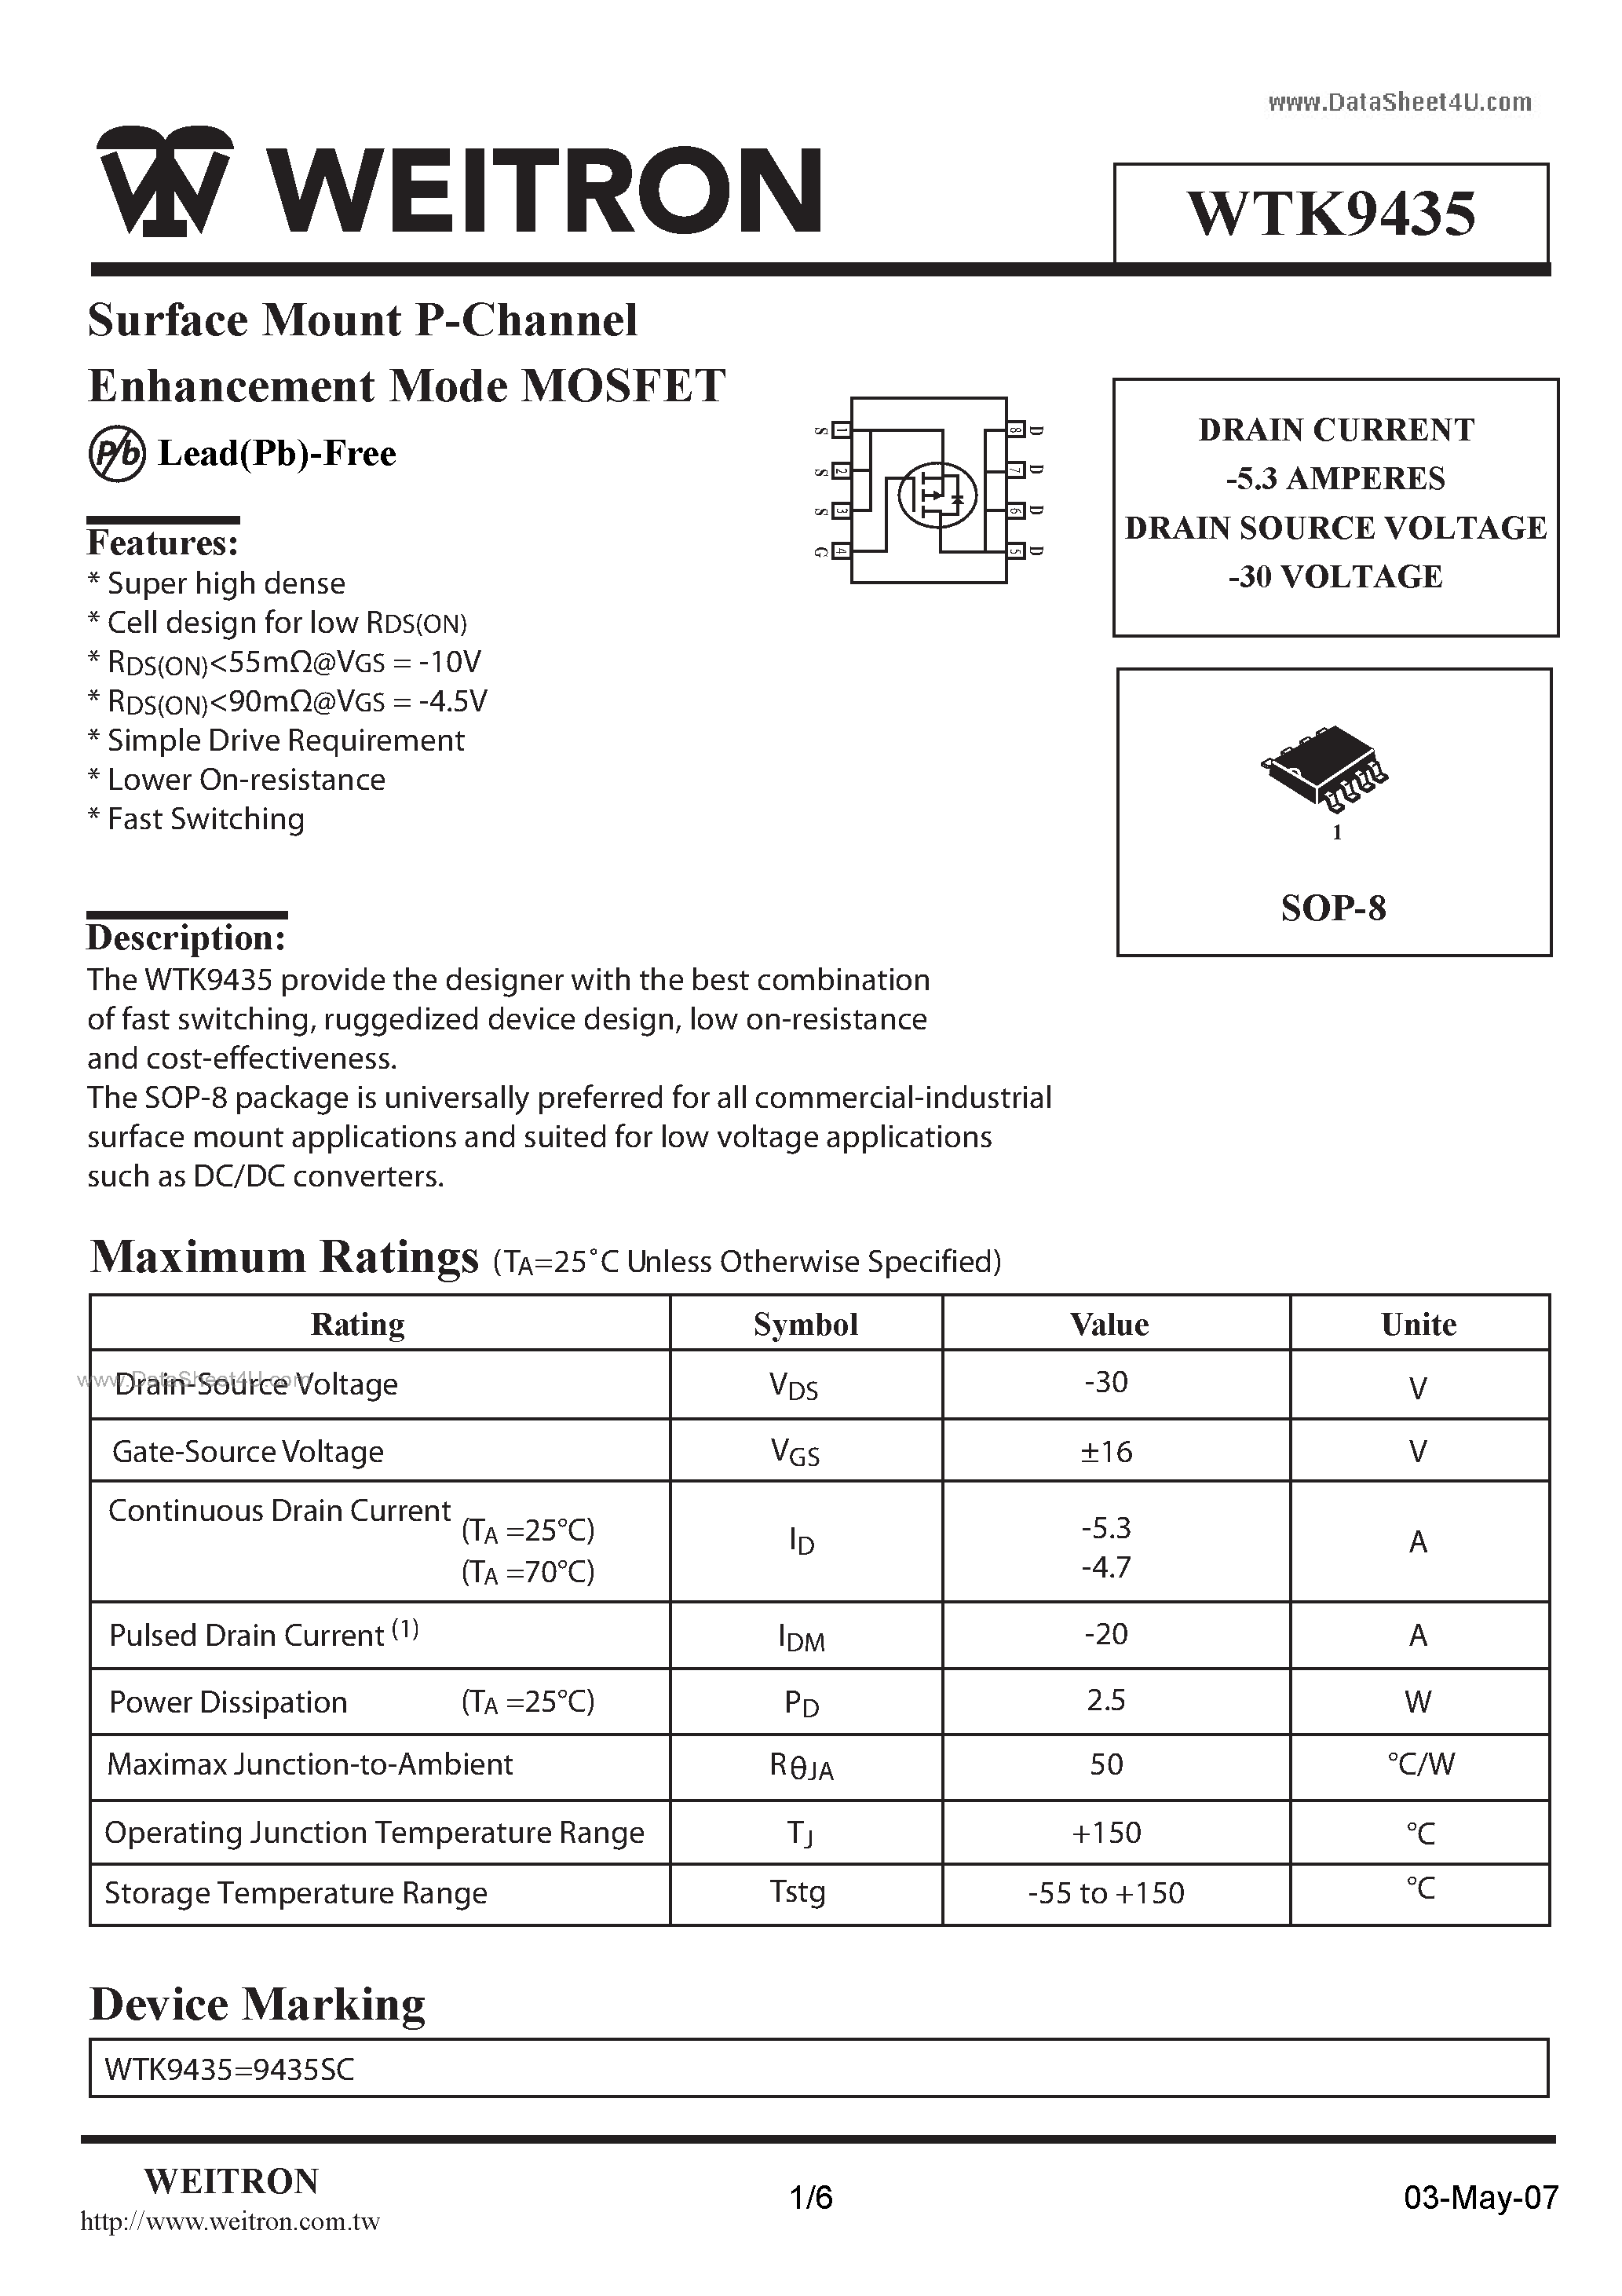 Datasheet WTK9435 - Surface Mount P-Channel Enhancement Mode MOSFET page 1